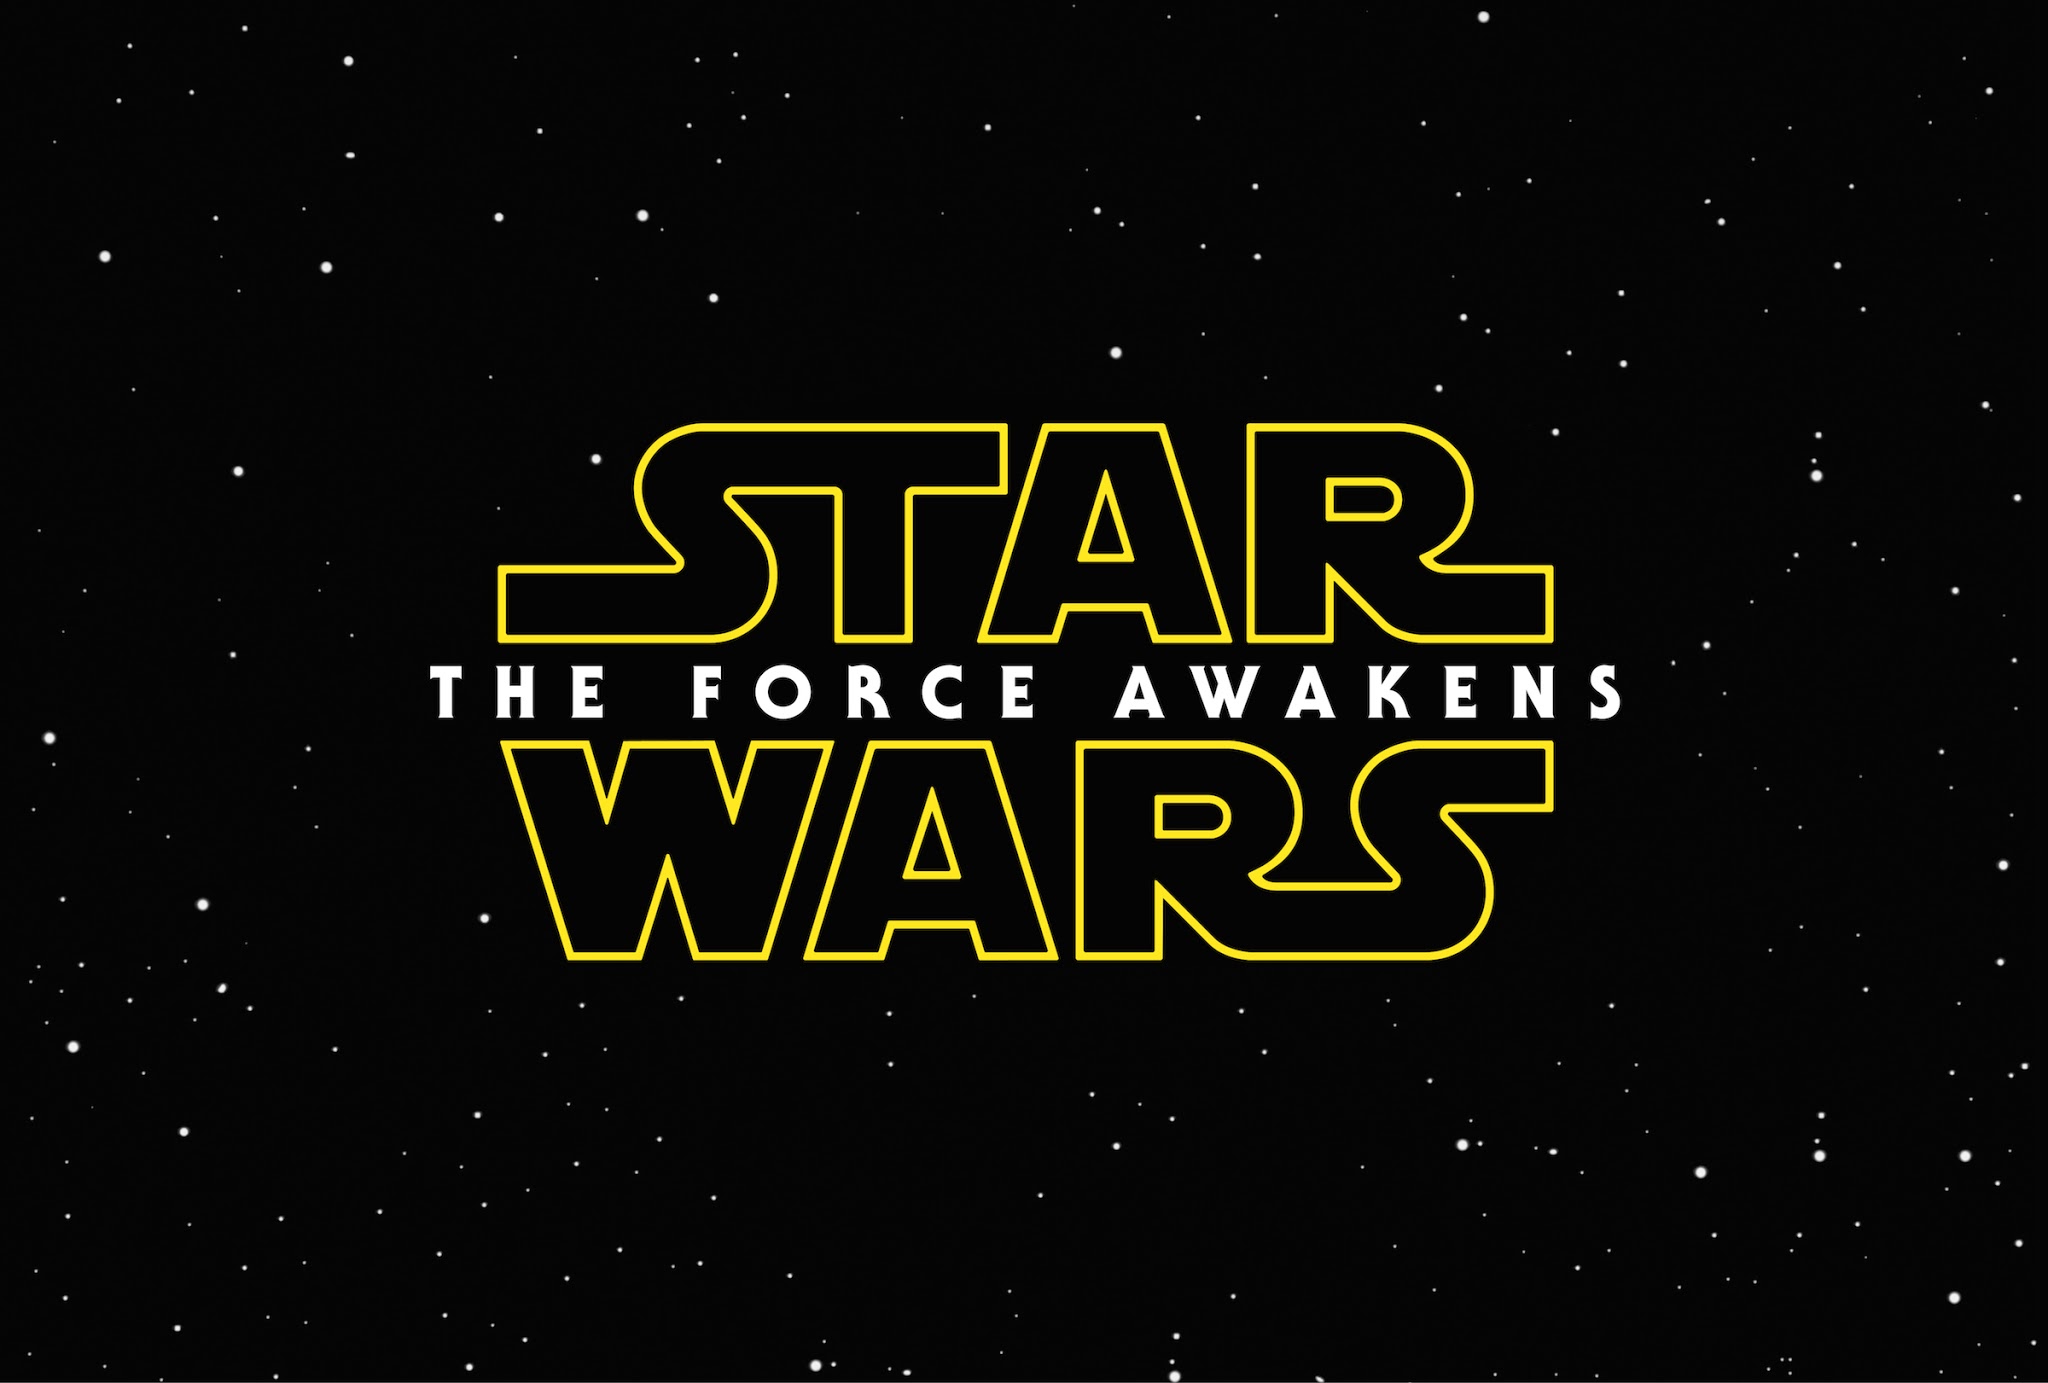 Star Wars - The Force Awakes